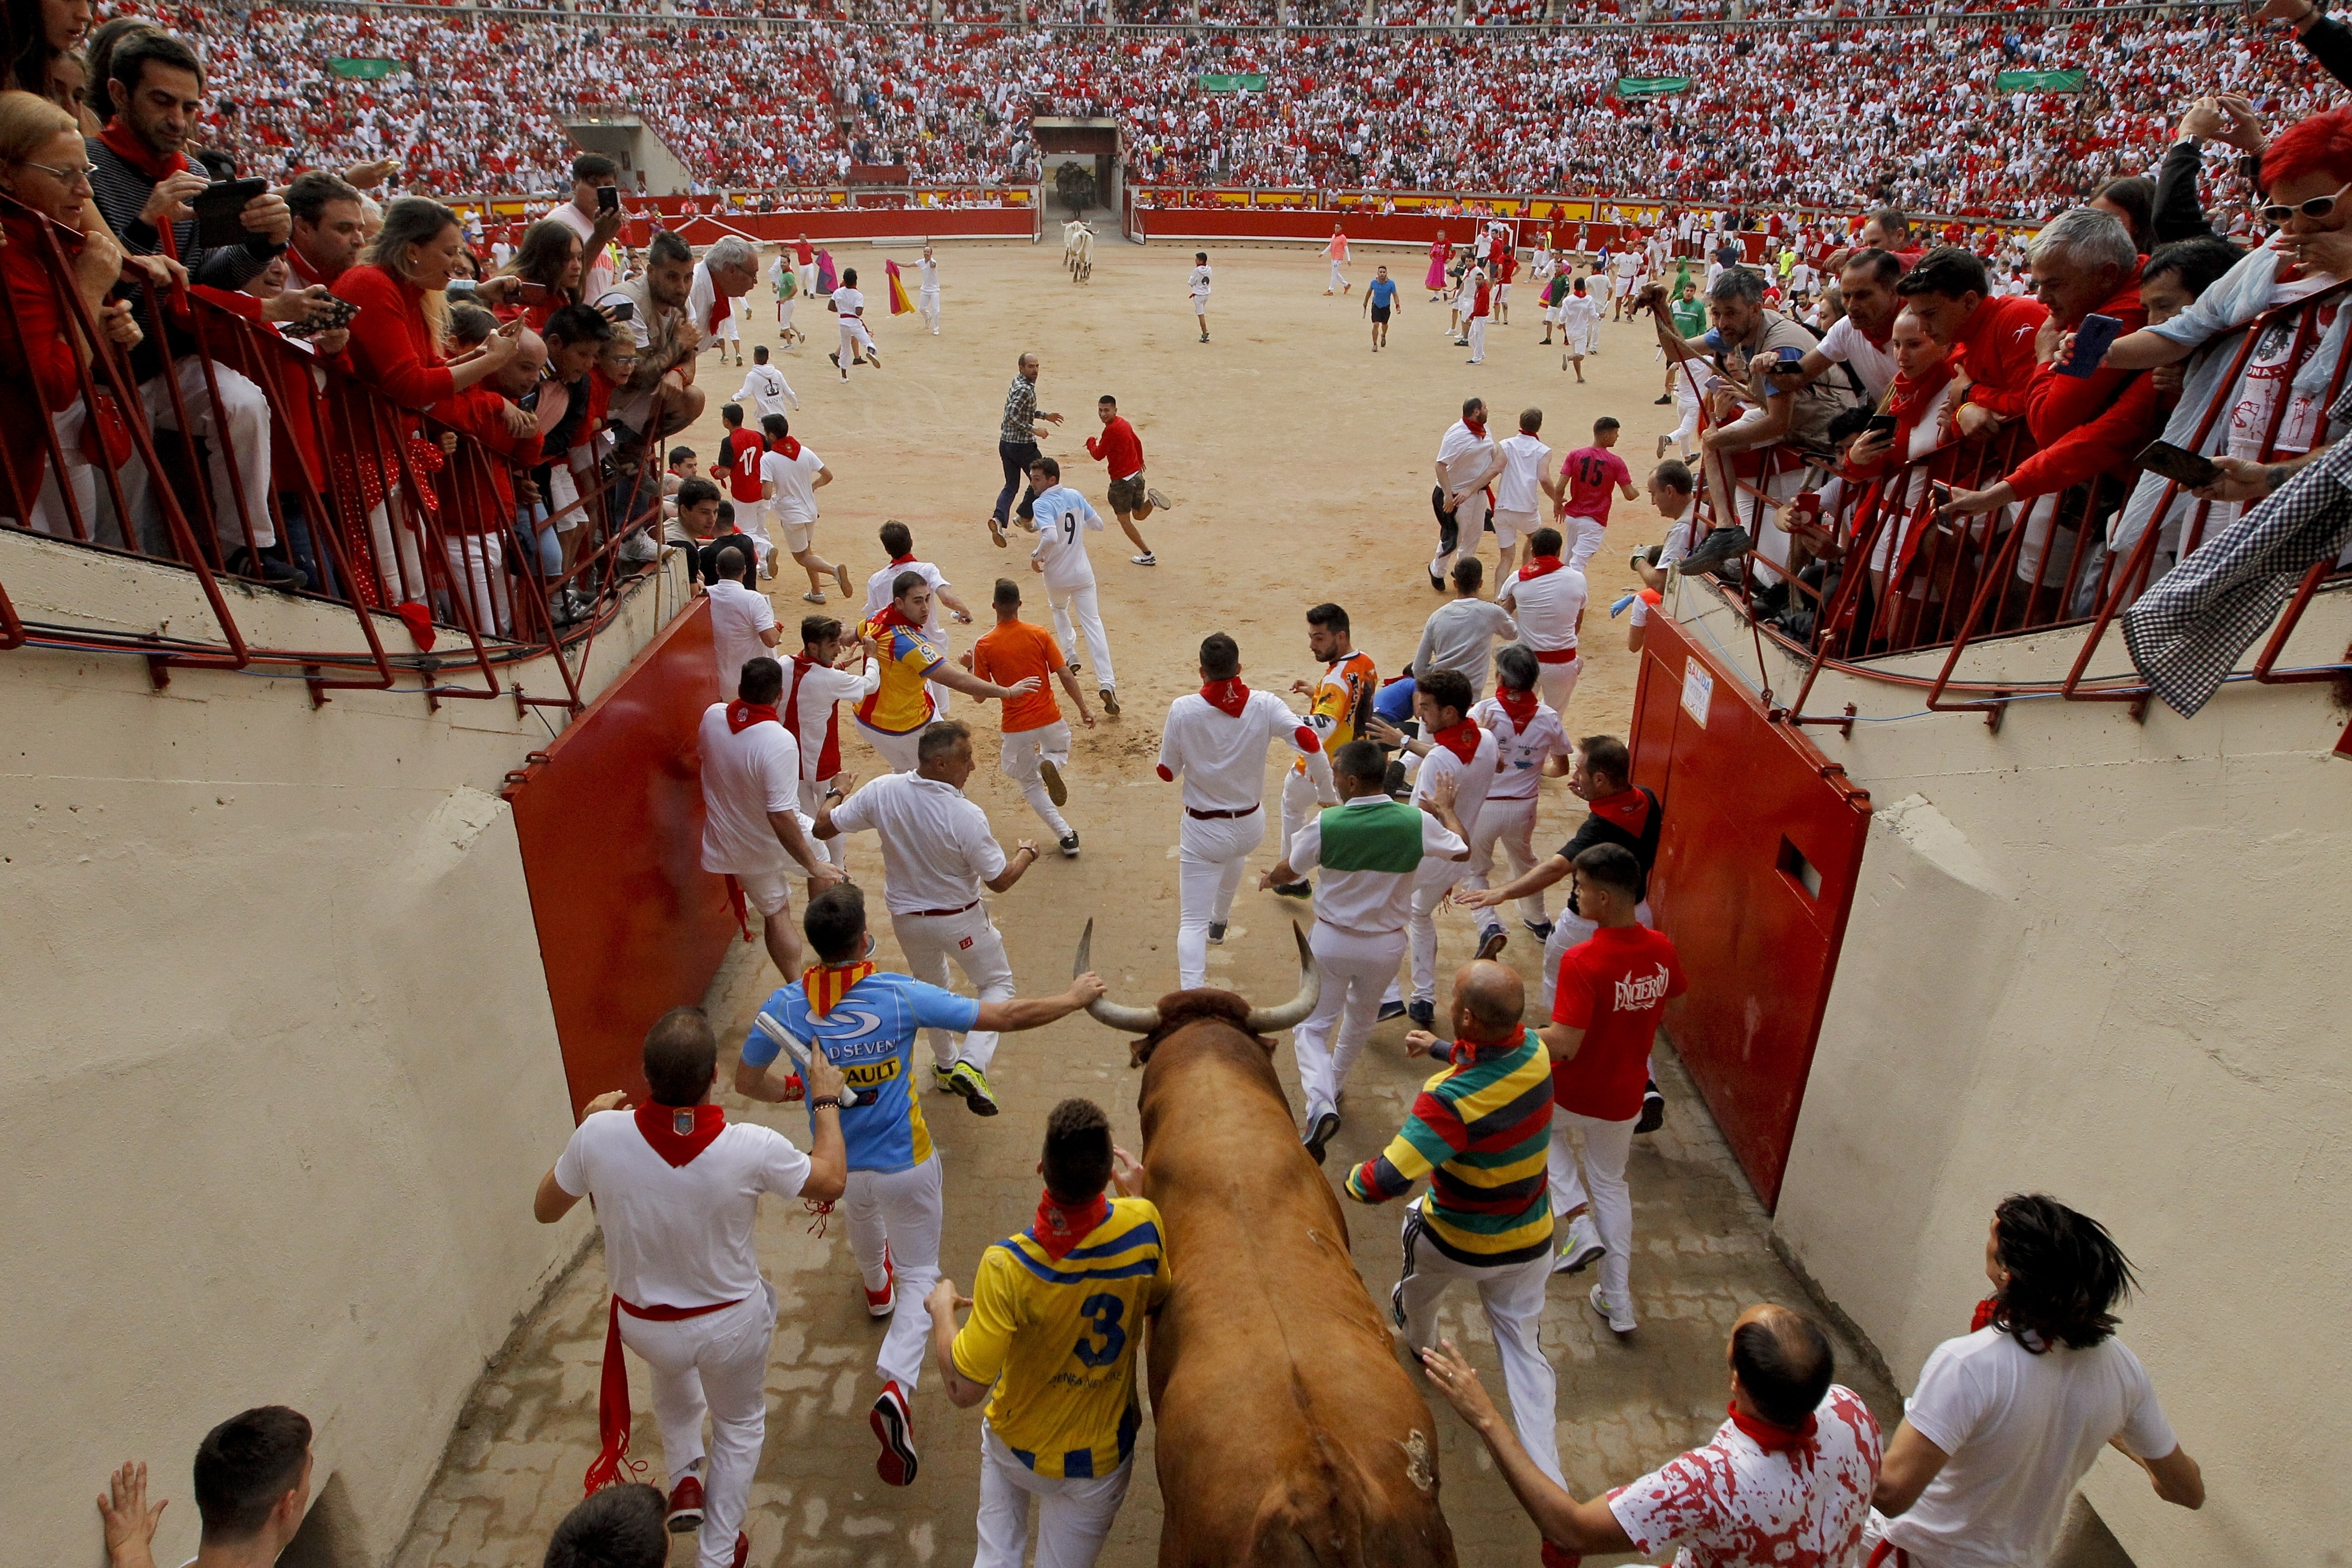 Revellers and a fighting bull arrive at the bullring during the running of the bulls at the San Fermin Festival, in Pamplona, northern Spain, Sunday, July 14, 2019. The San Fermin fiesta made internationally famous by Ernest Hemingway in his novel 